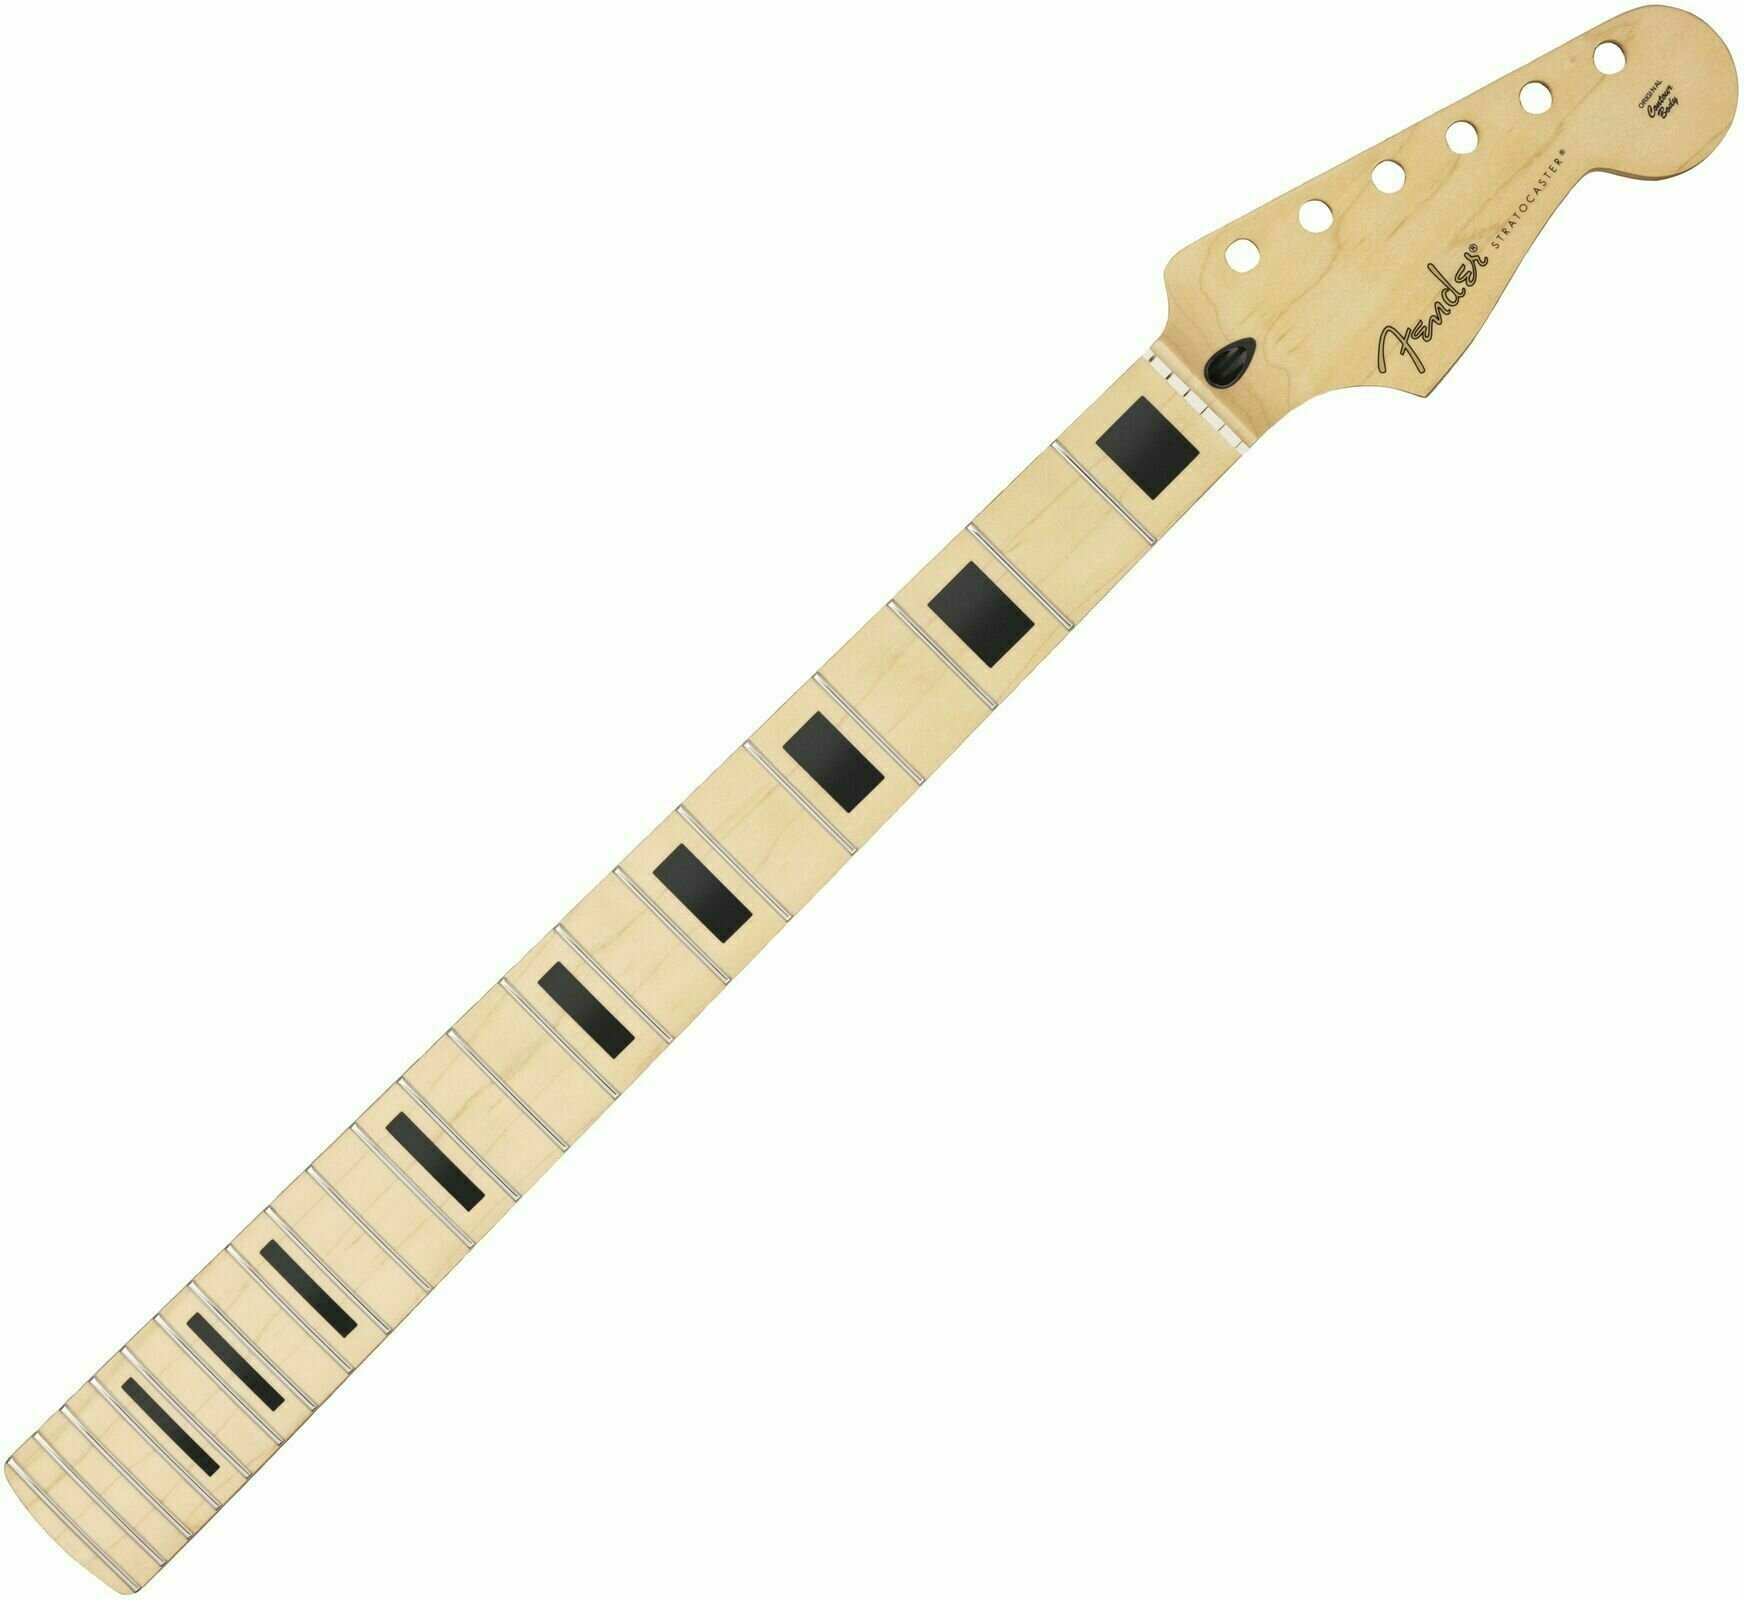 Photos - Guitar Accessory Fender Player Series Stratocaster Neck Block Inlays Maple 22 Maple 